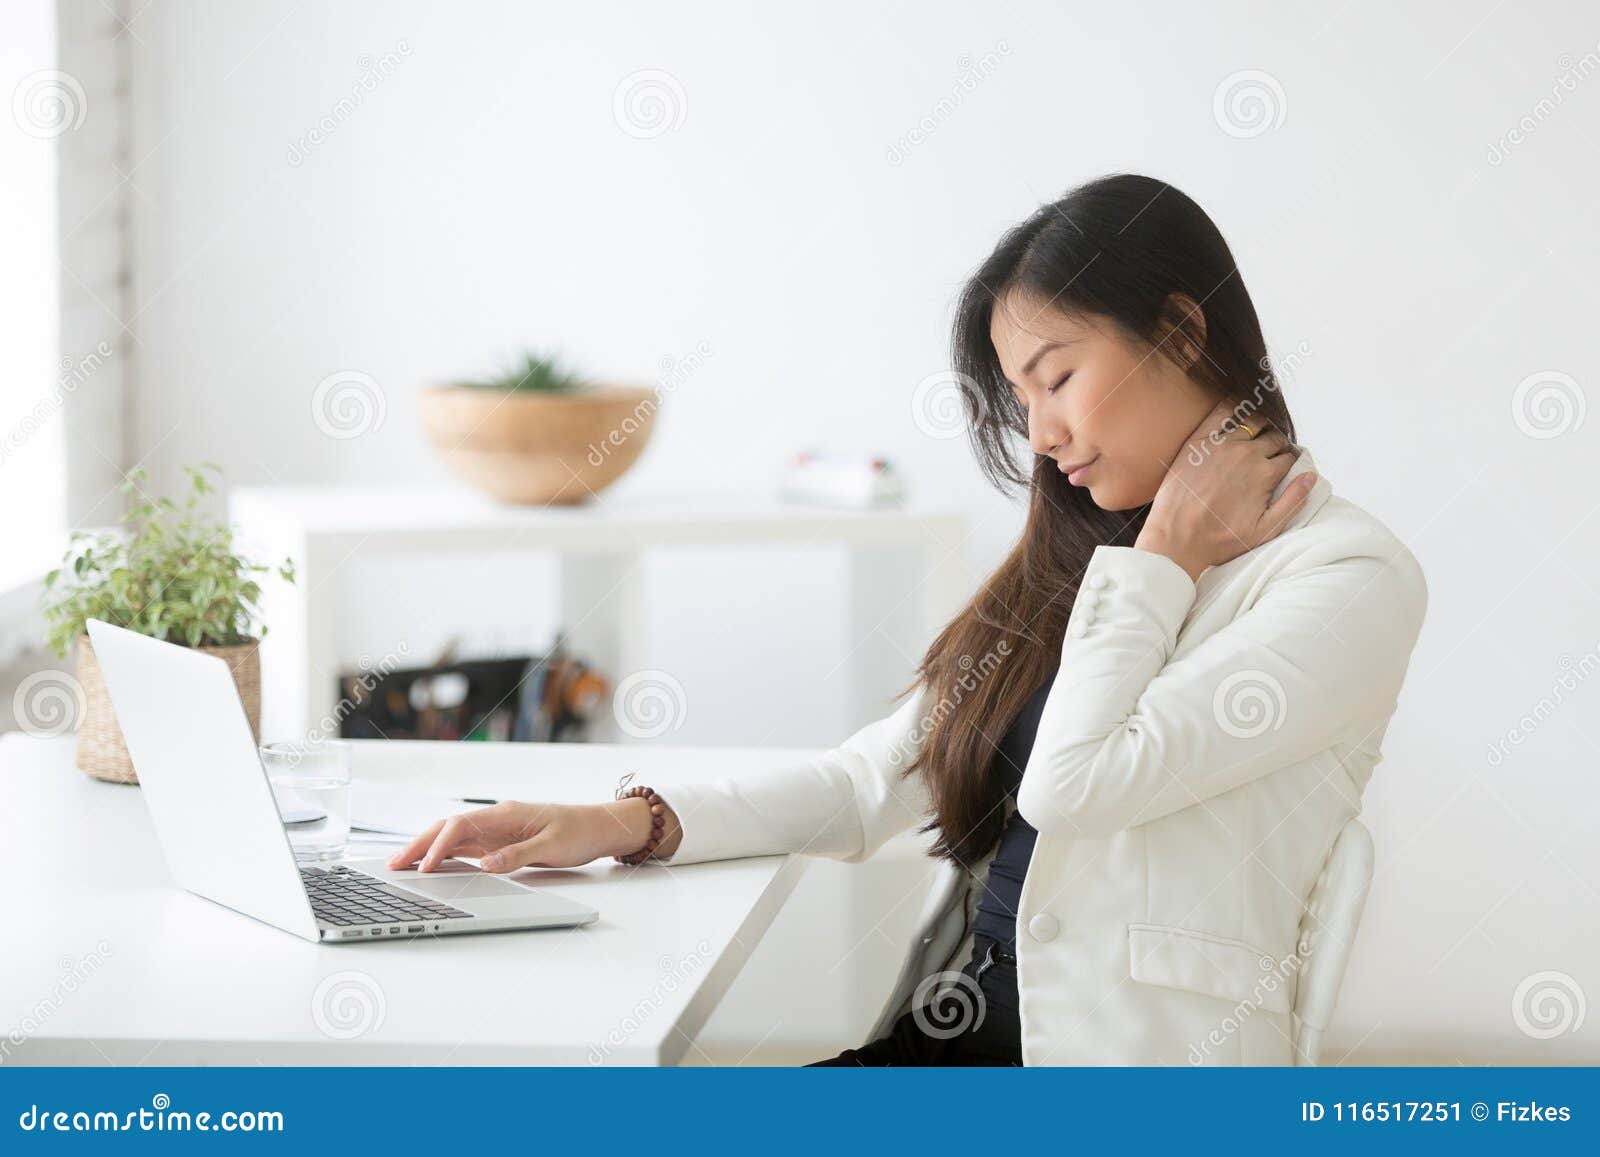 young asian businesswoman feels neck pain after sedentary comput